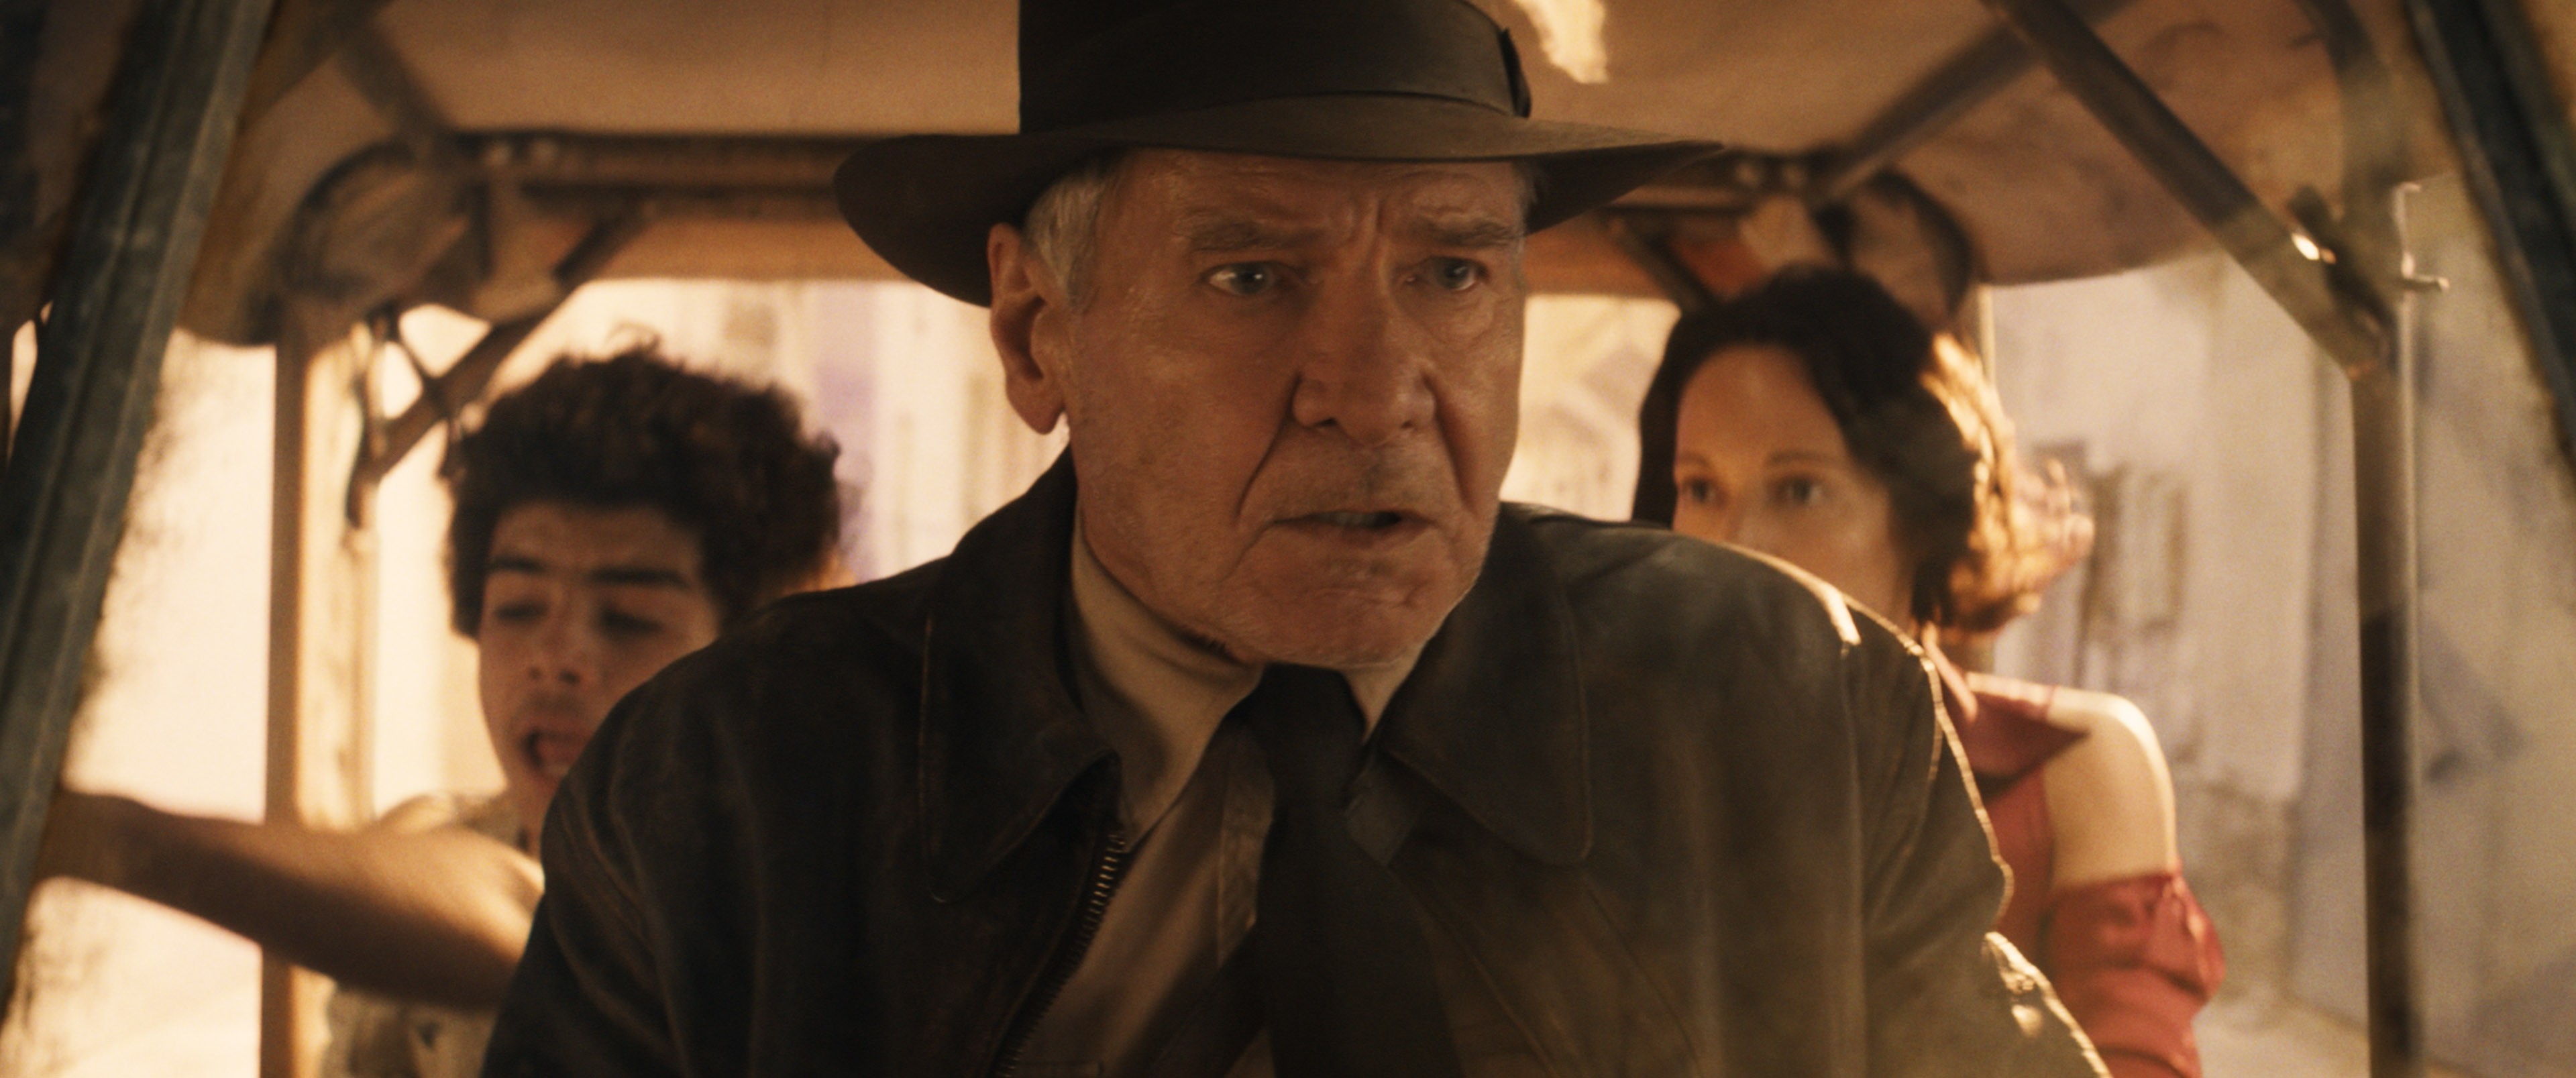 Indiana Jones 5 reviews: Reactions, Rotten Tomatoes score & more